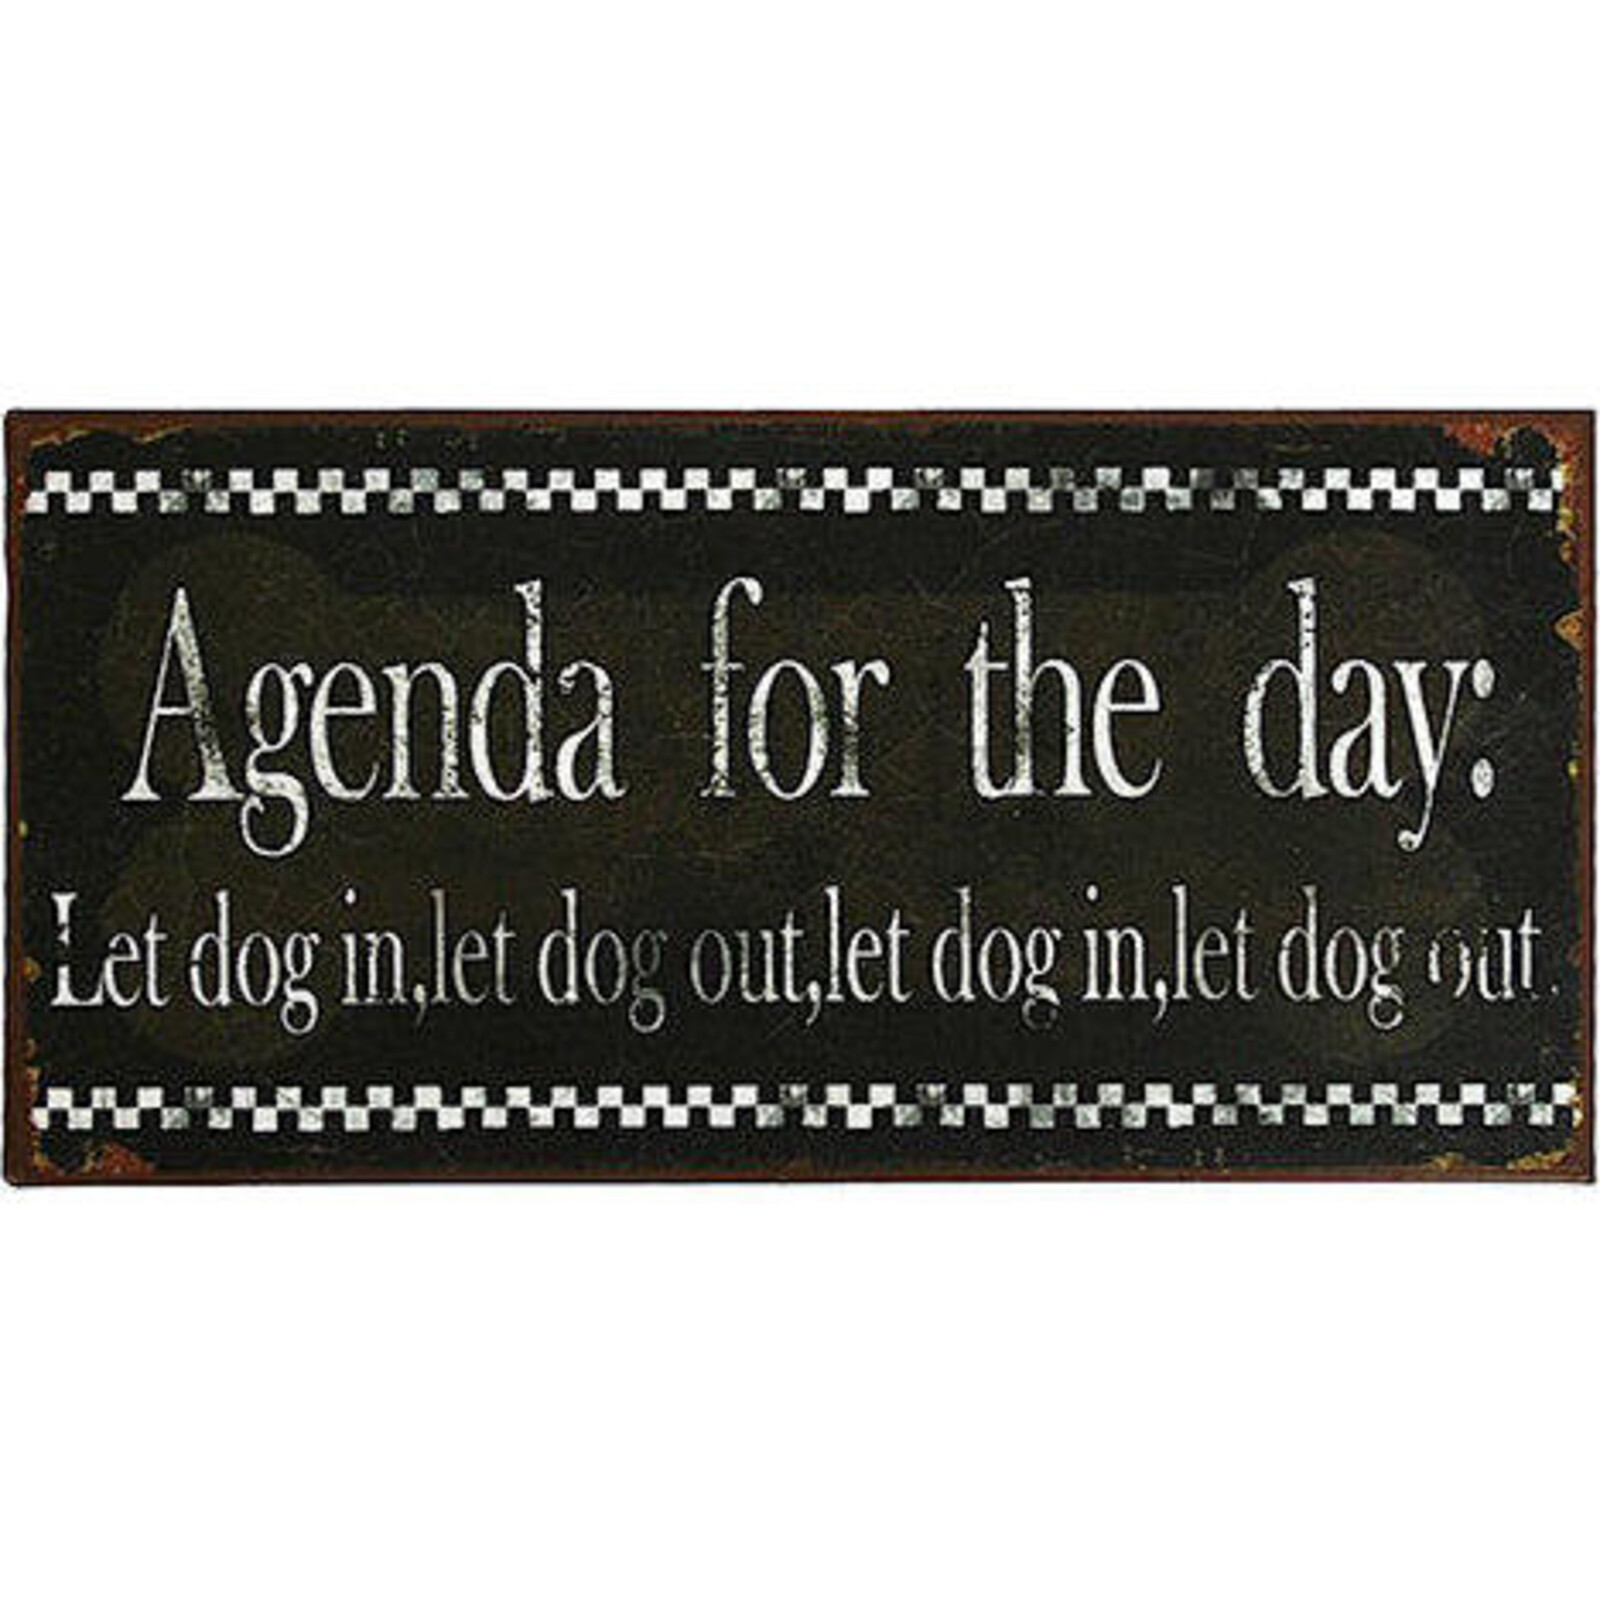 Tin Sign - Agenda for the day